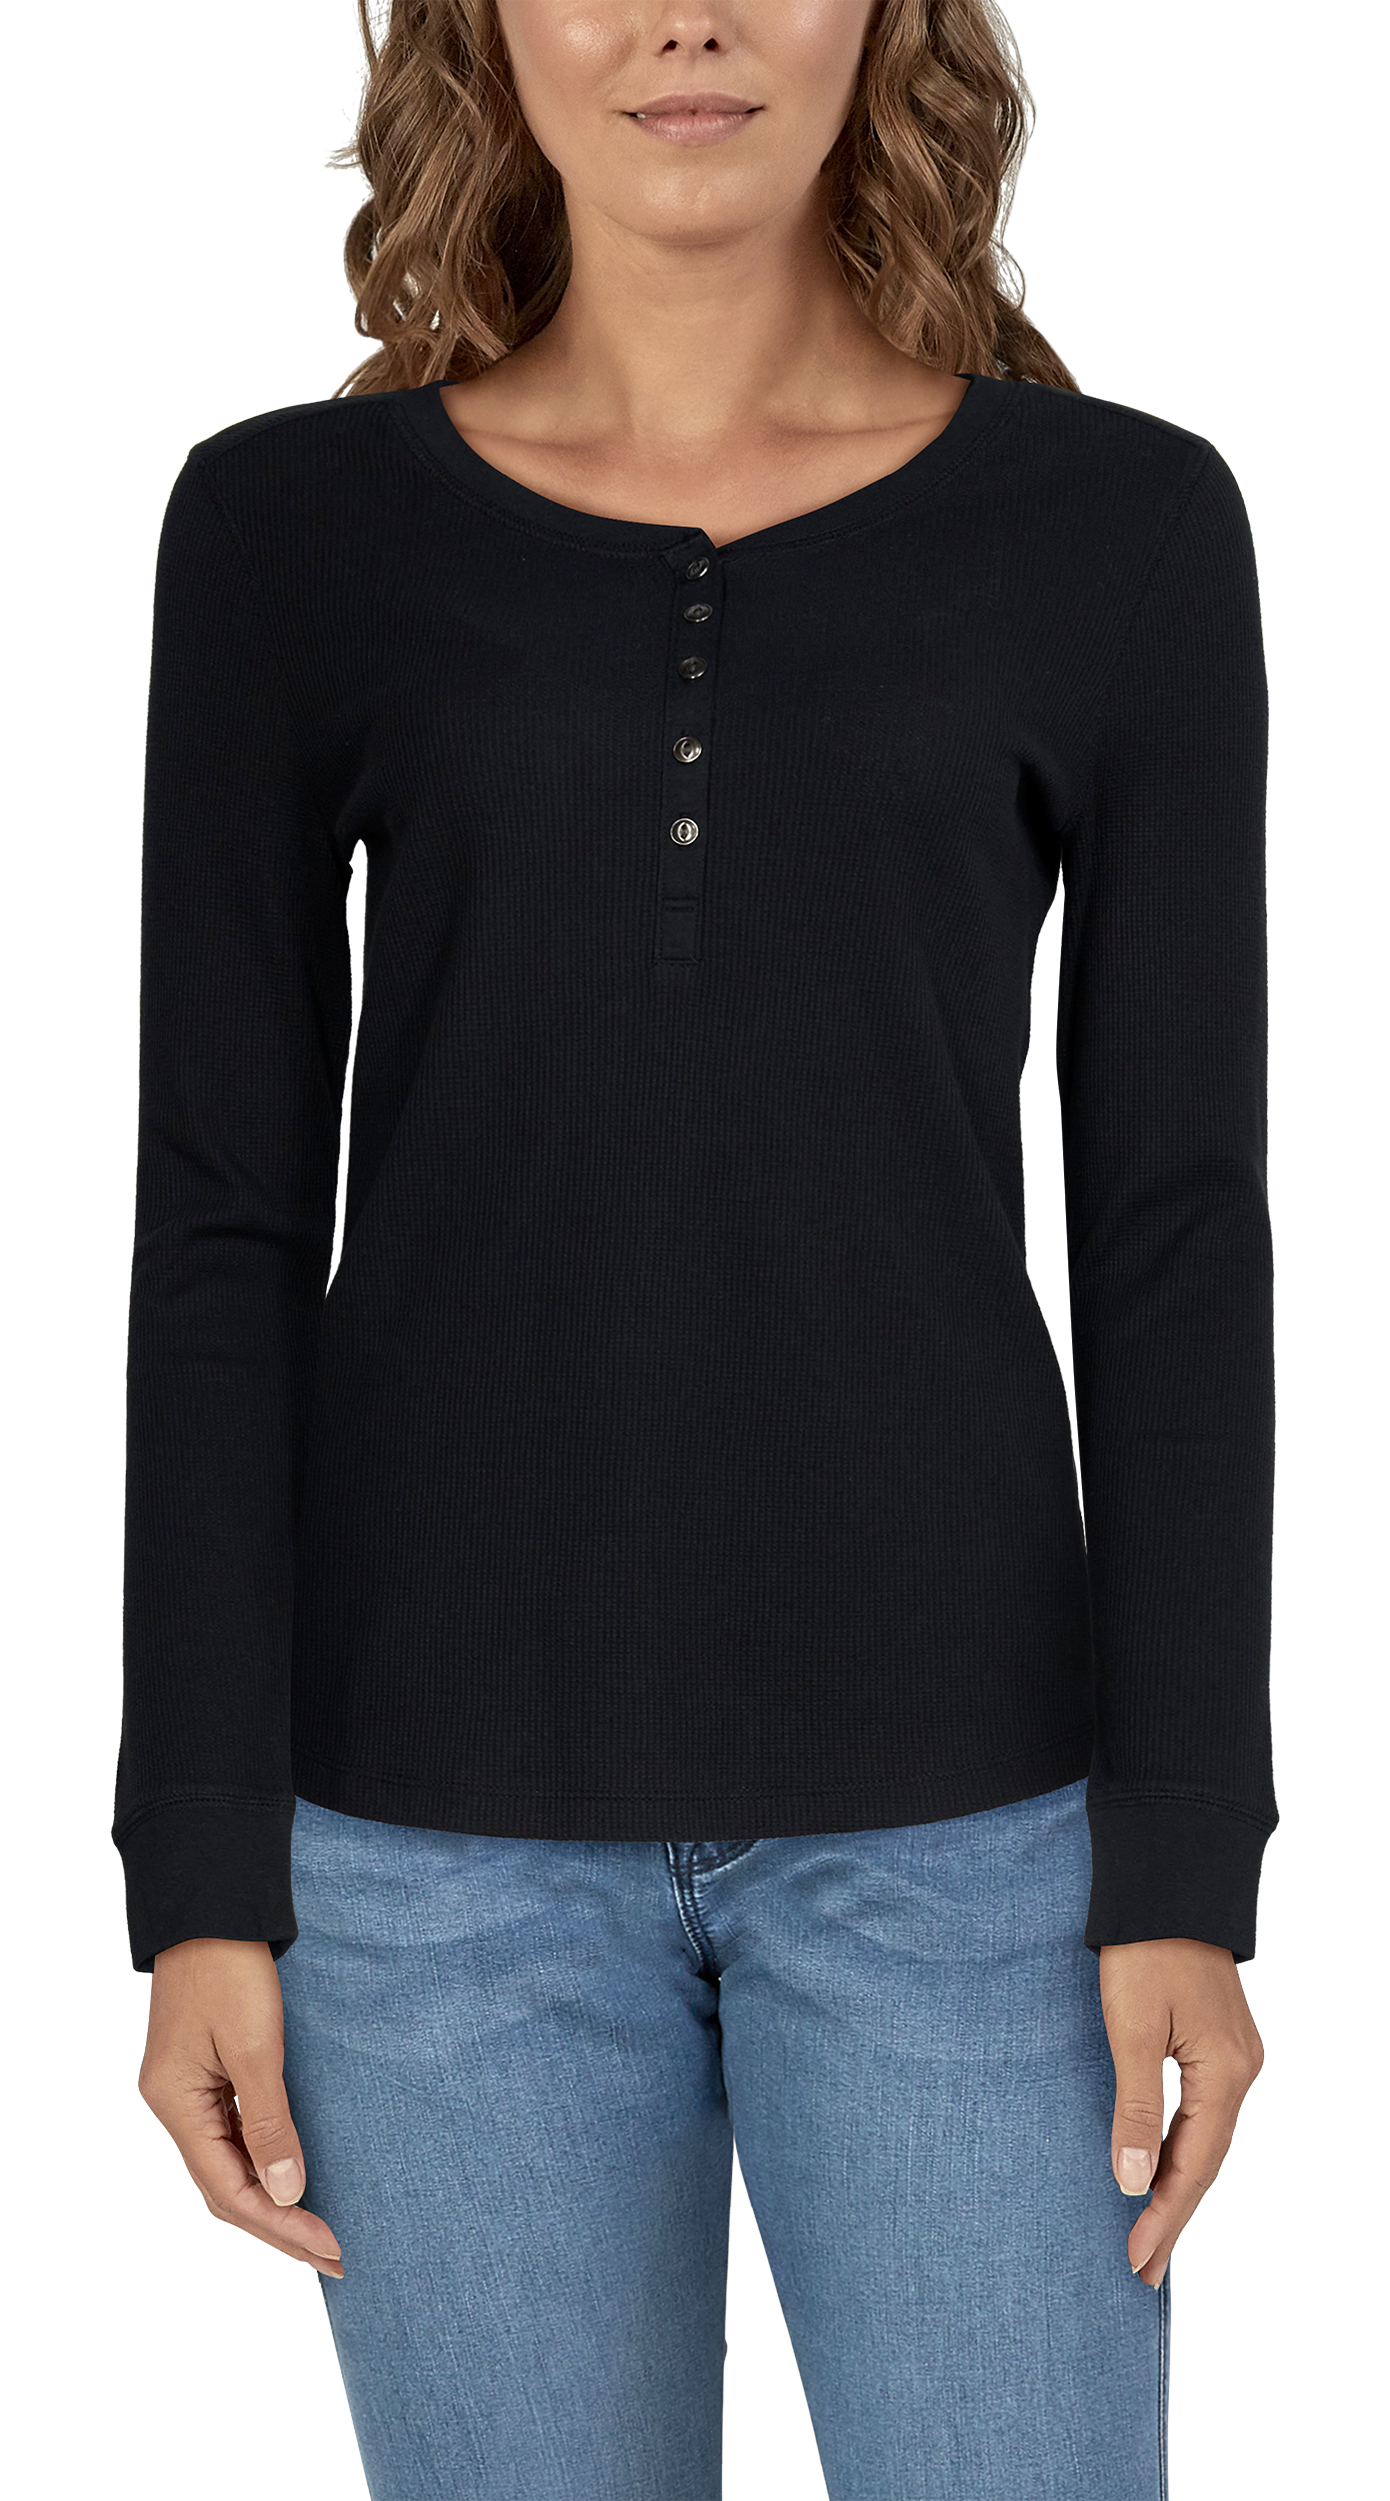 Natural Reflections Thermal Long-Sleeve Henley for Ladies - Anthracite - 2X